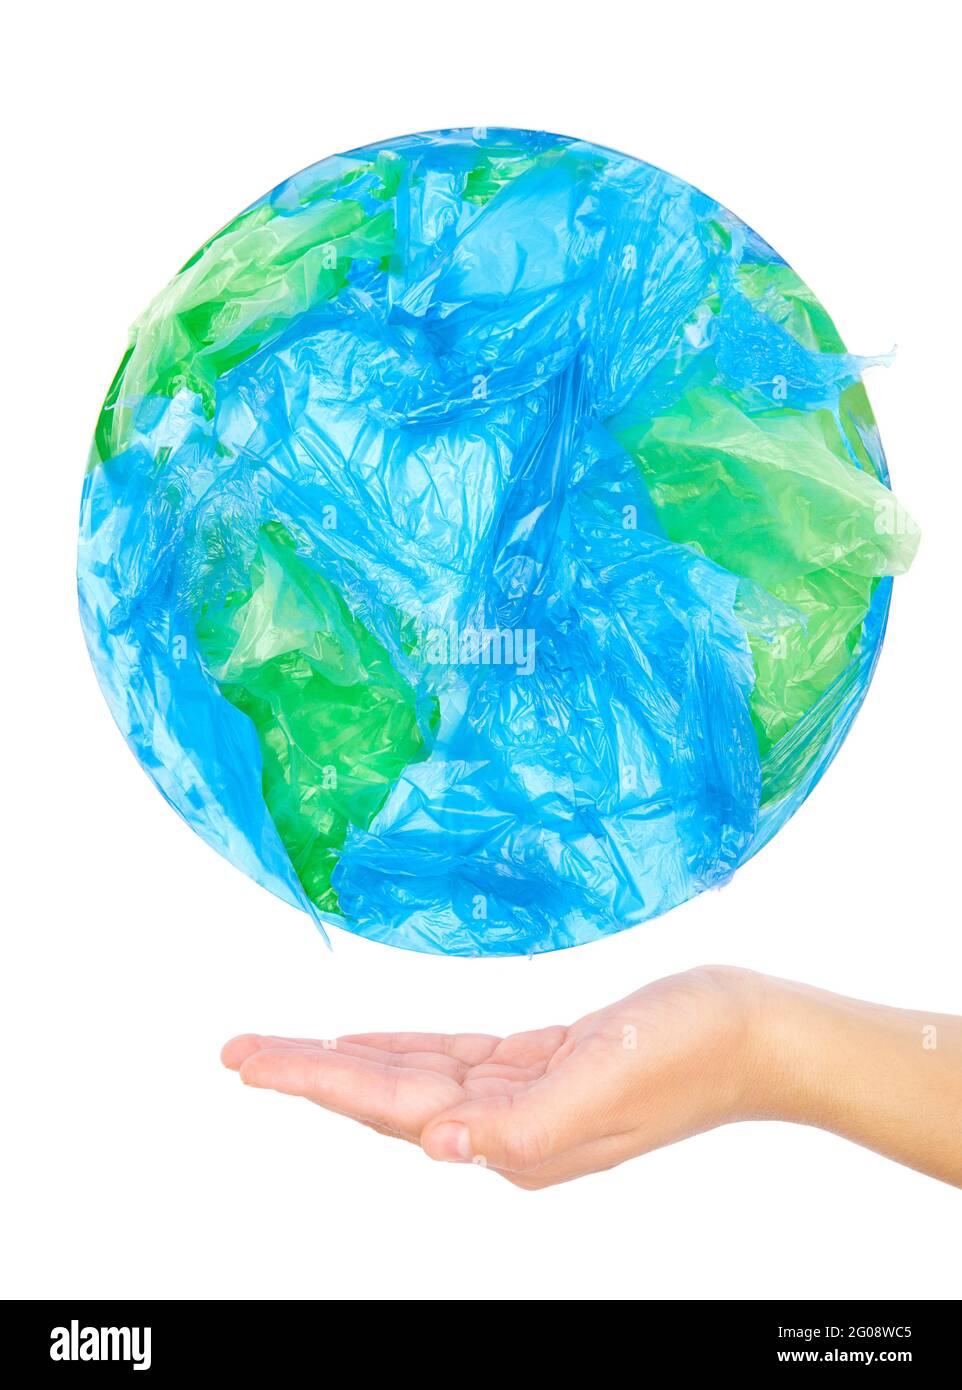 Human hand holding a globe made of plastic bags isolated on white Stock Photo